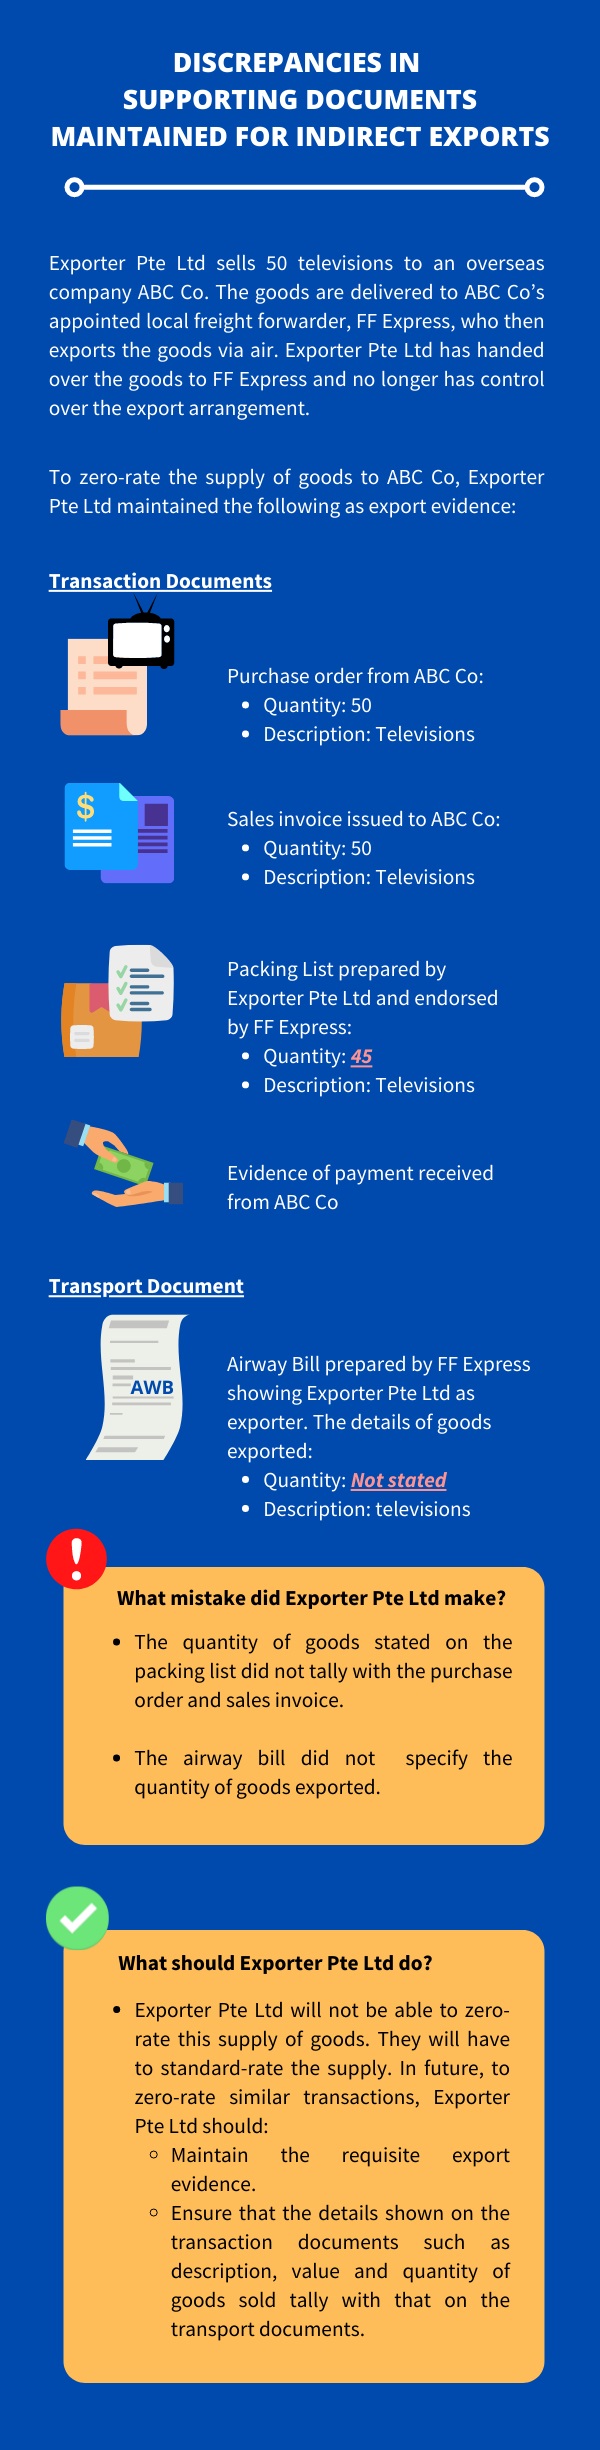 This infographic lists the discrepancies in supporting documents maintained for indirect exports